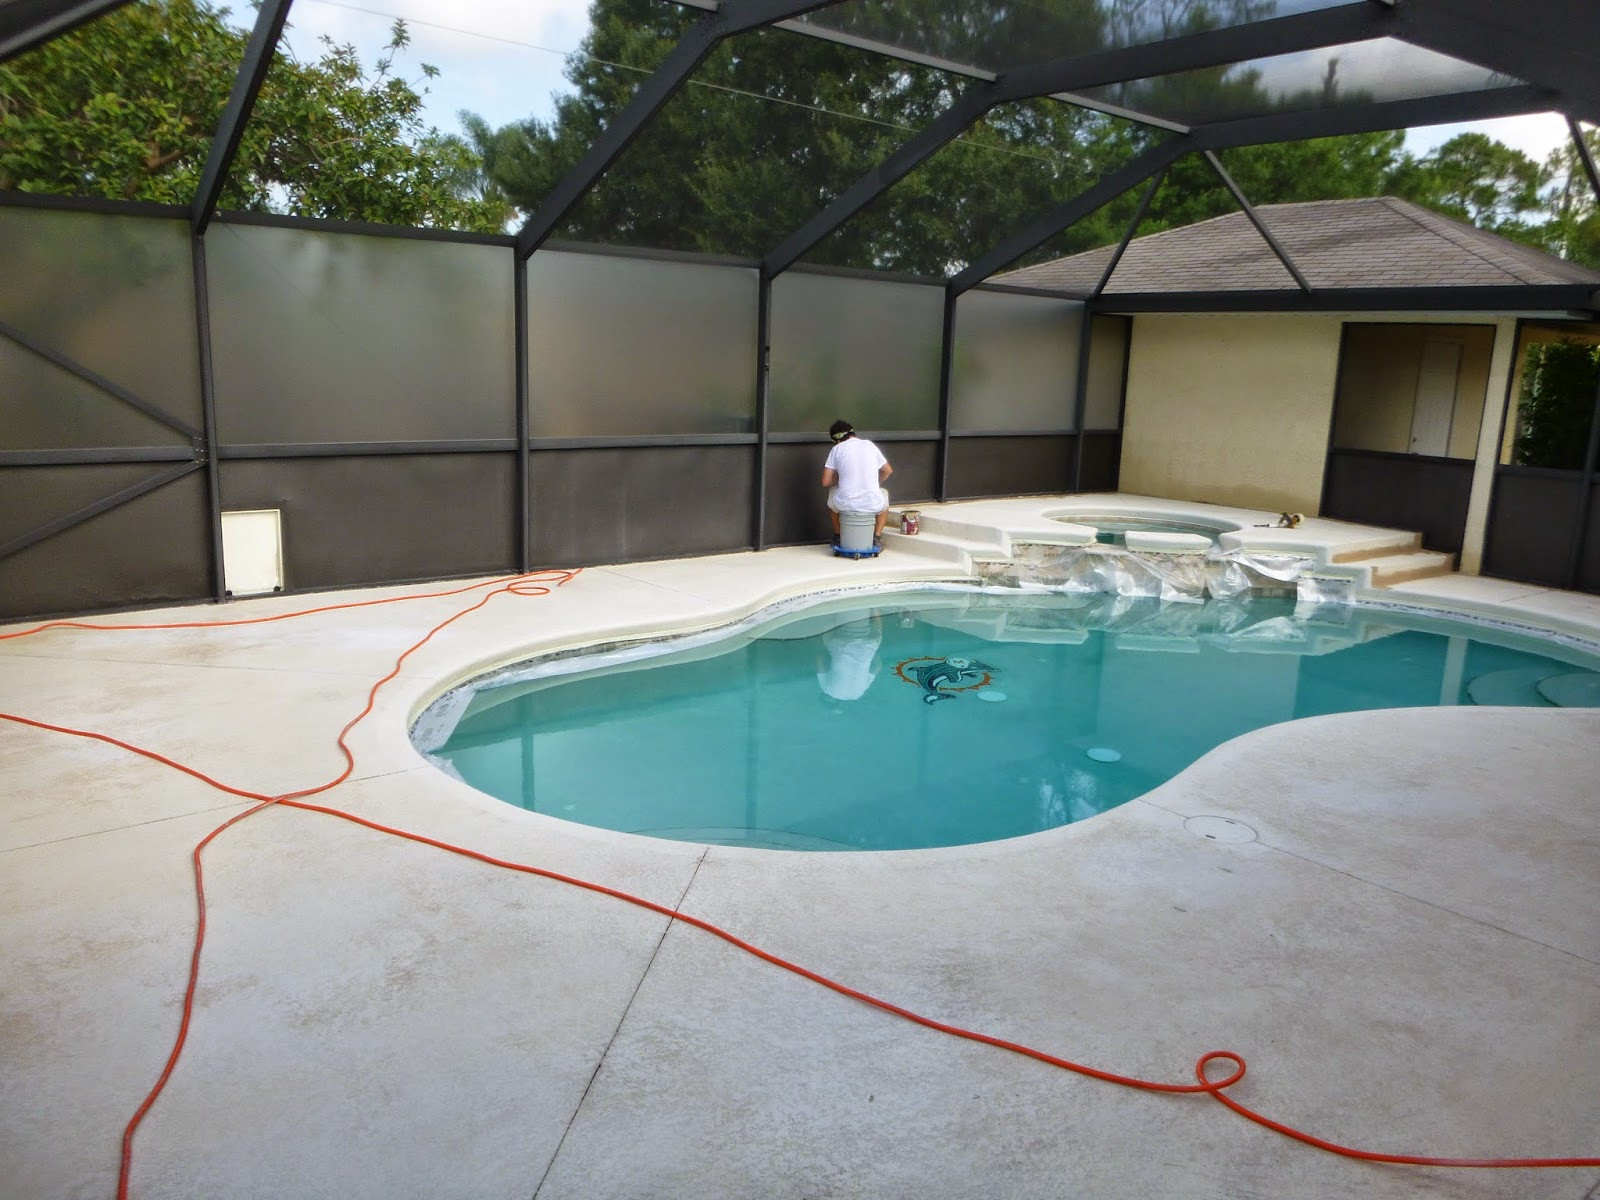 Concrete Pool Deck Painting
 Painting Artists Corp Painting pany Port St Lucie FL